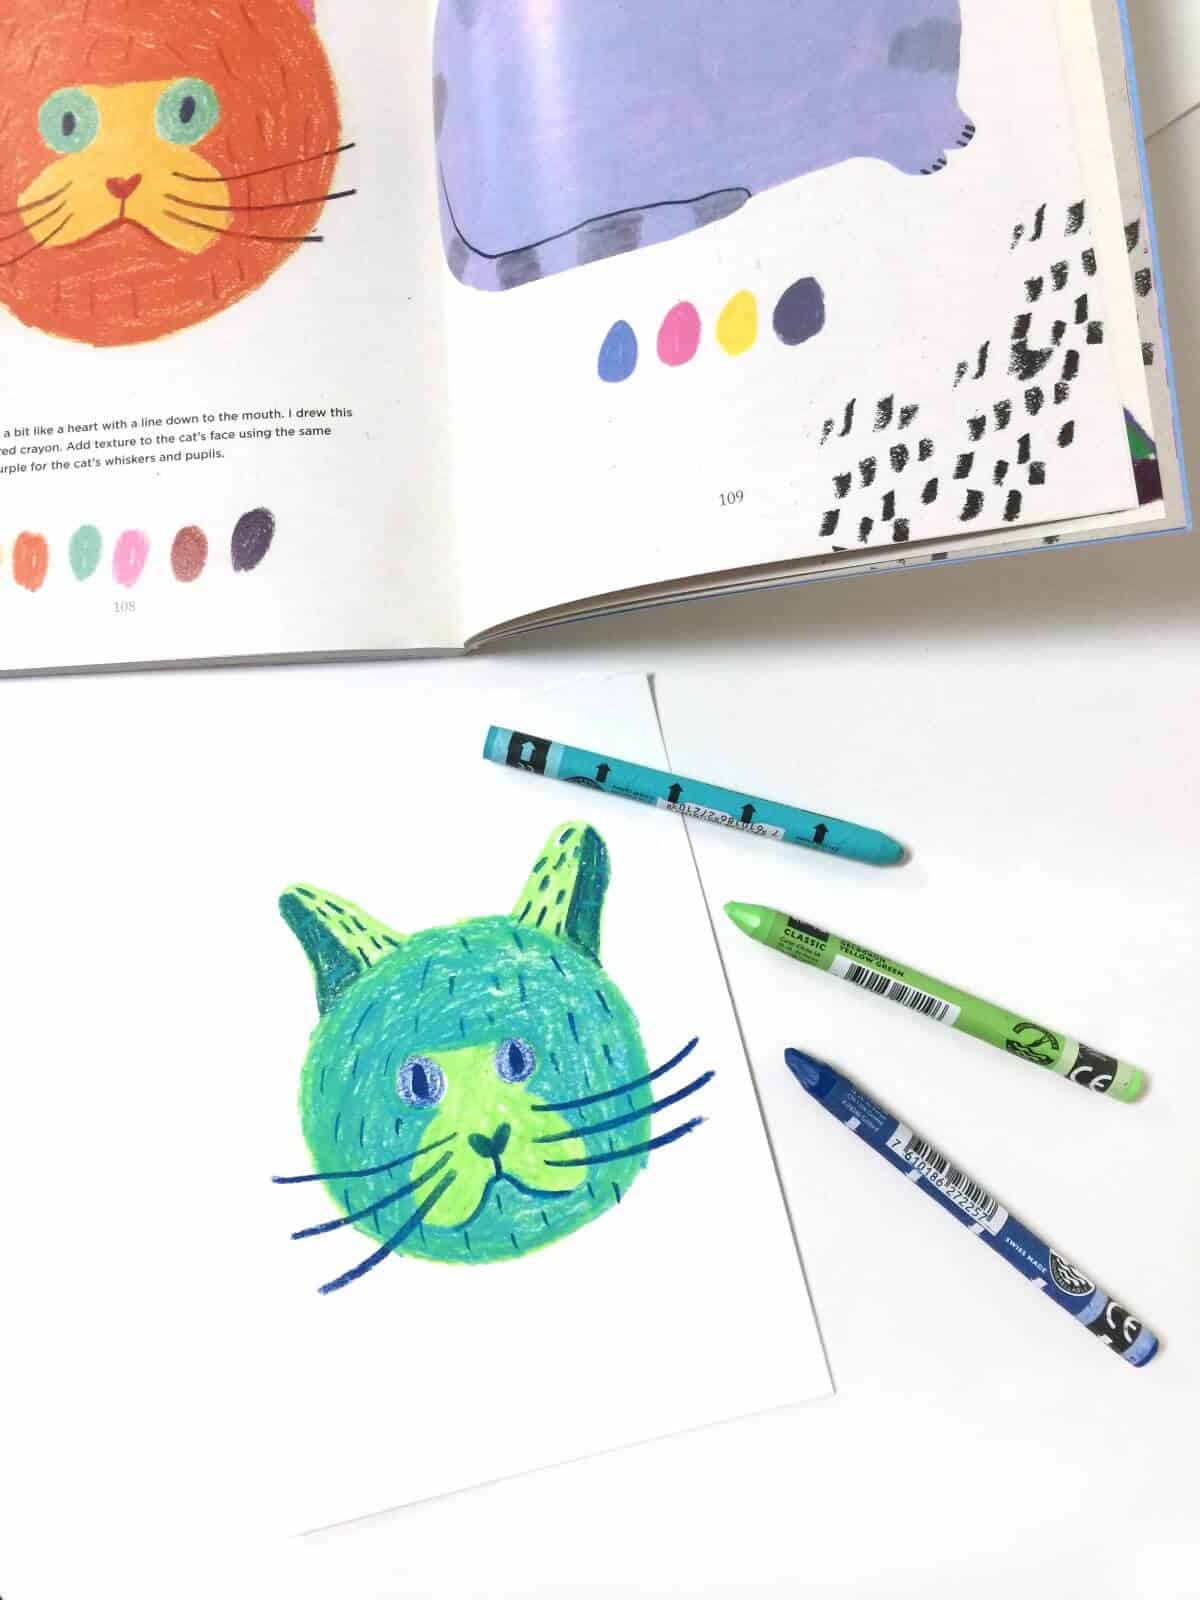 Monika Forsberg's book, Crayon An Artist's Colorful Guide to Drawing on the go! is awesome.